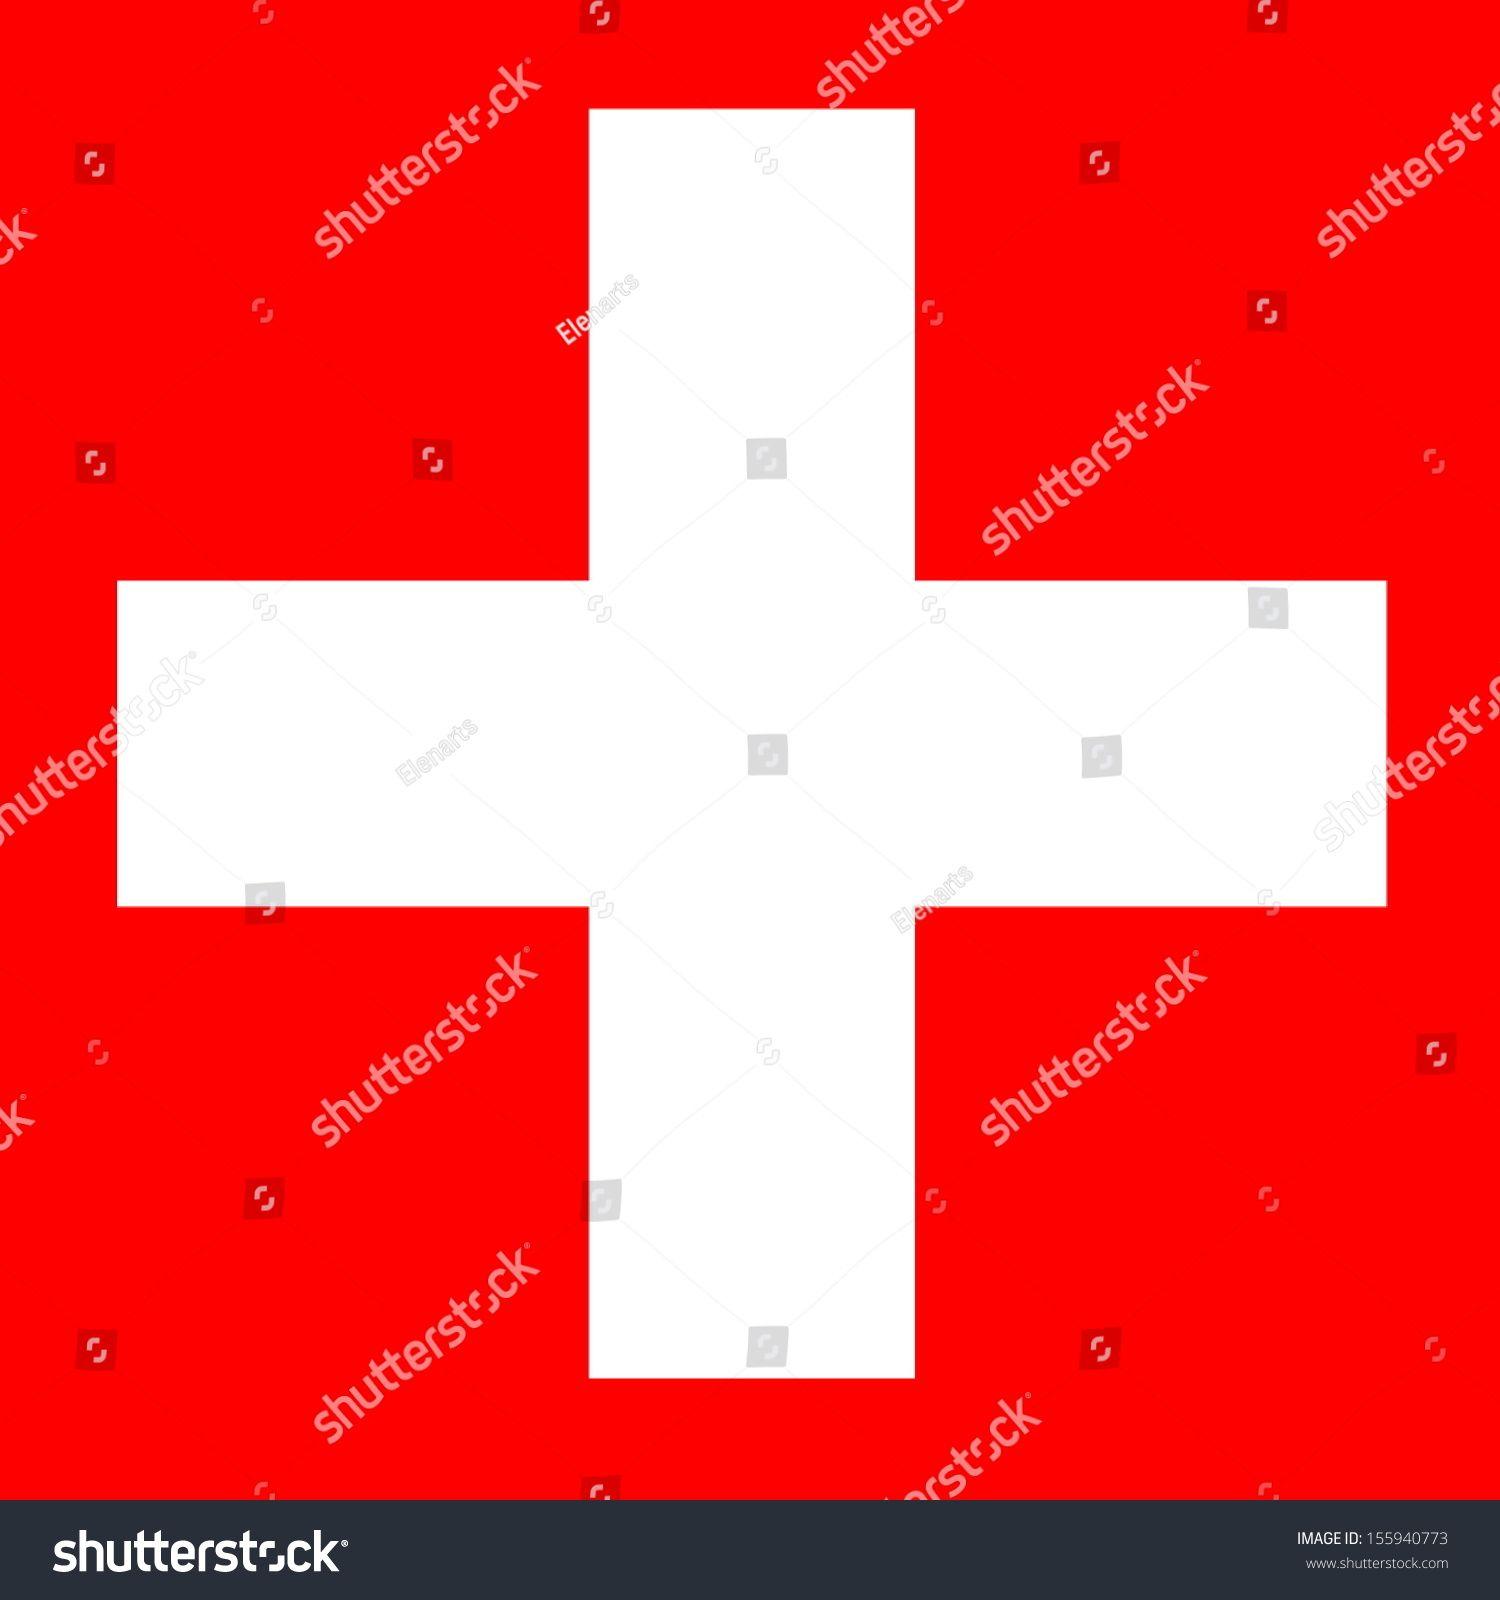 Red Block with White Cross Logo - White cross red background Logos